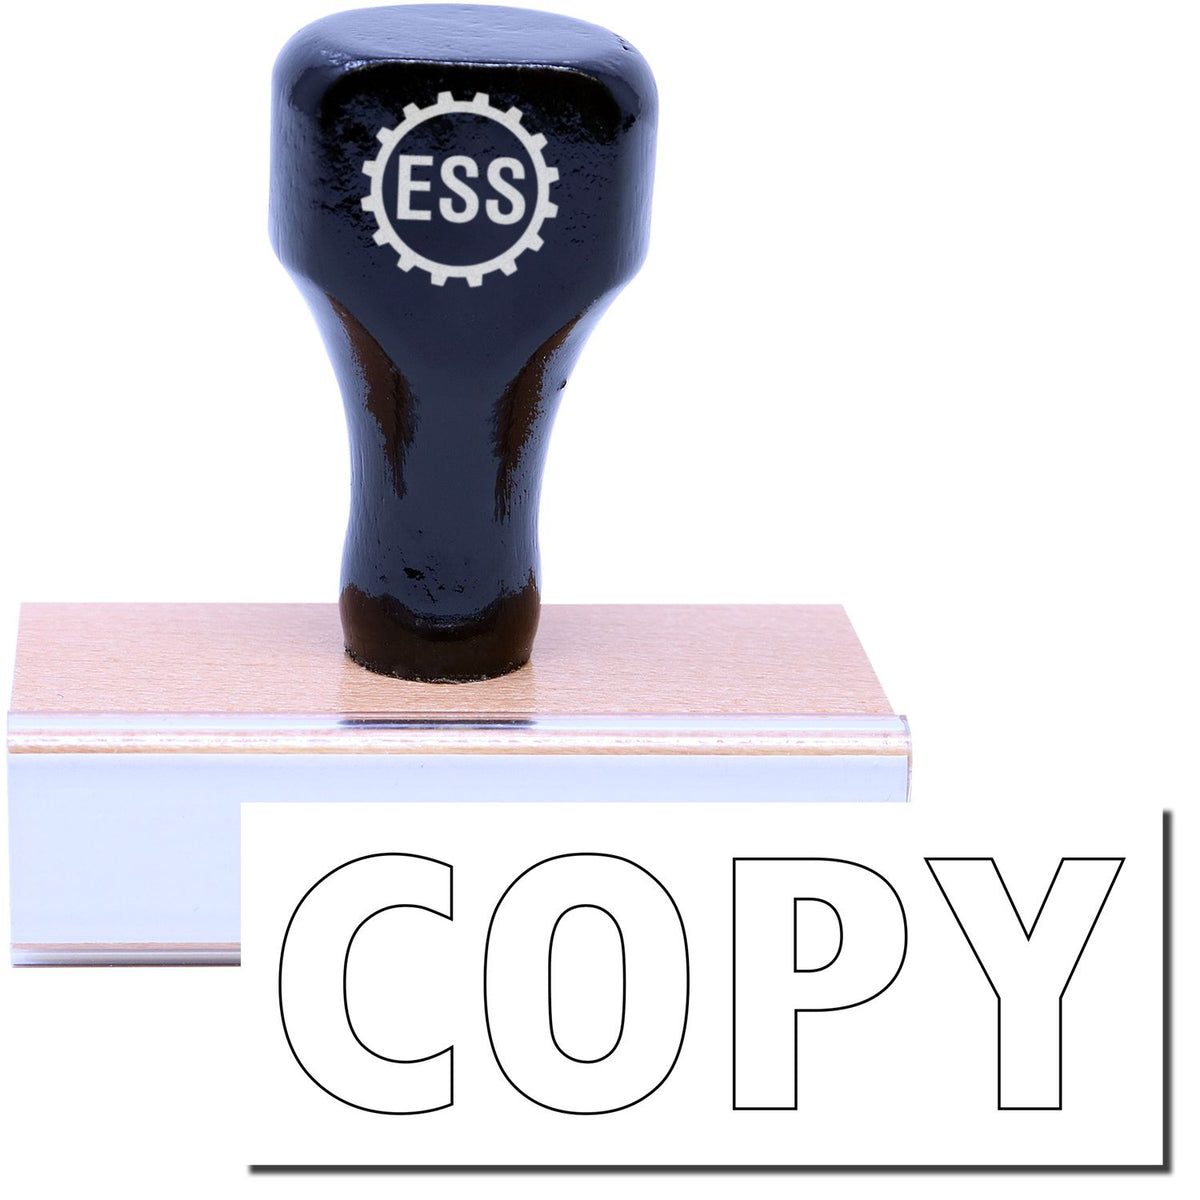 A stock office rubber stamp with a stamped image showing how the text &quot;COPY&quot; in a large font and outline style is displayed after stamping.